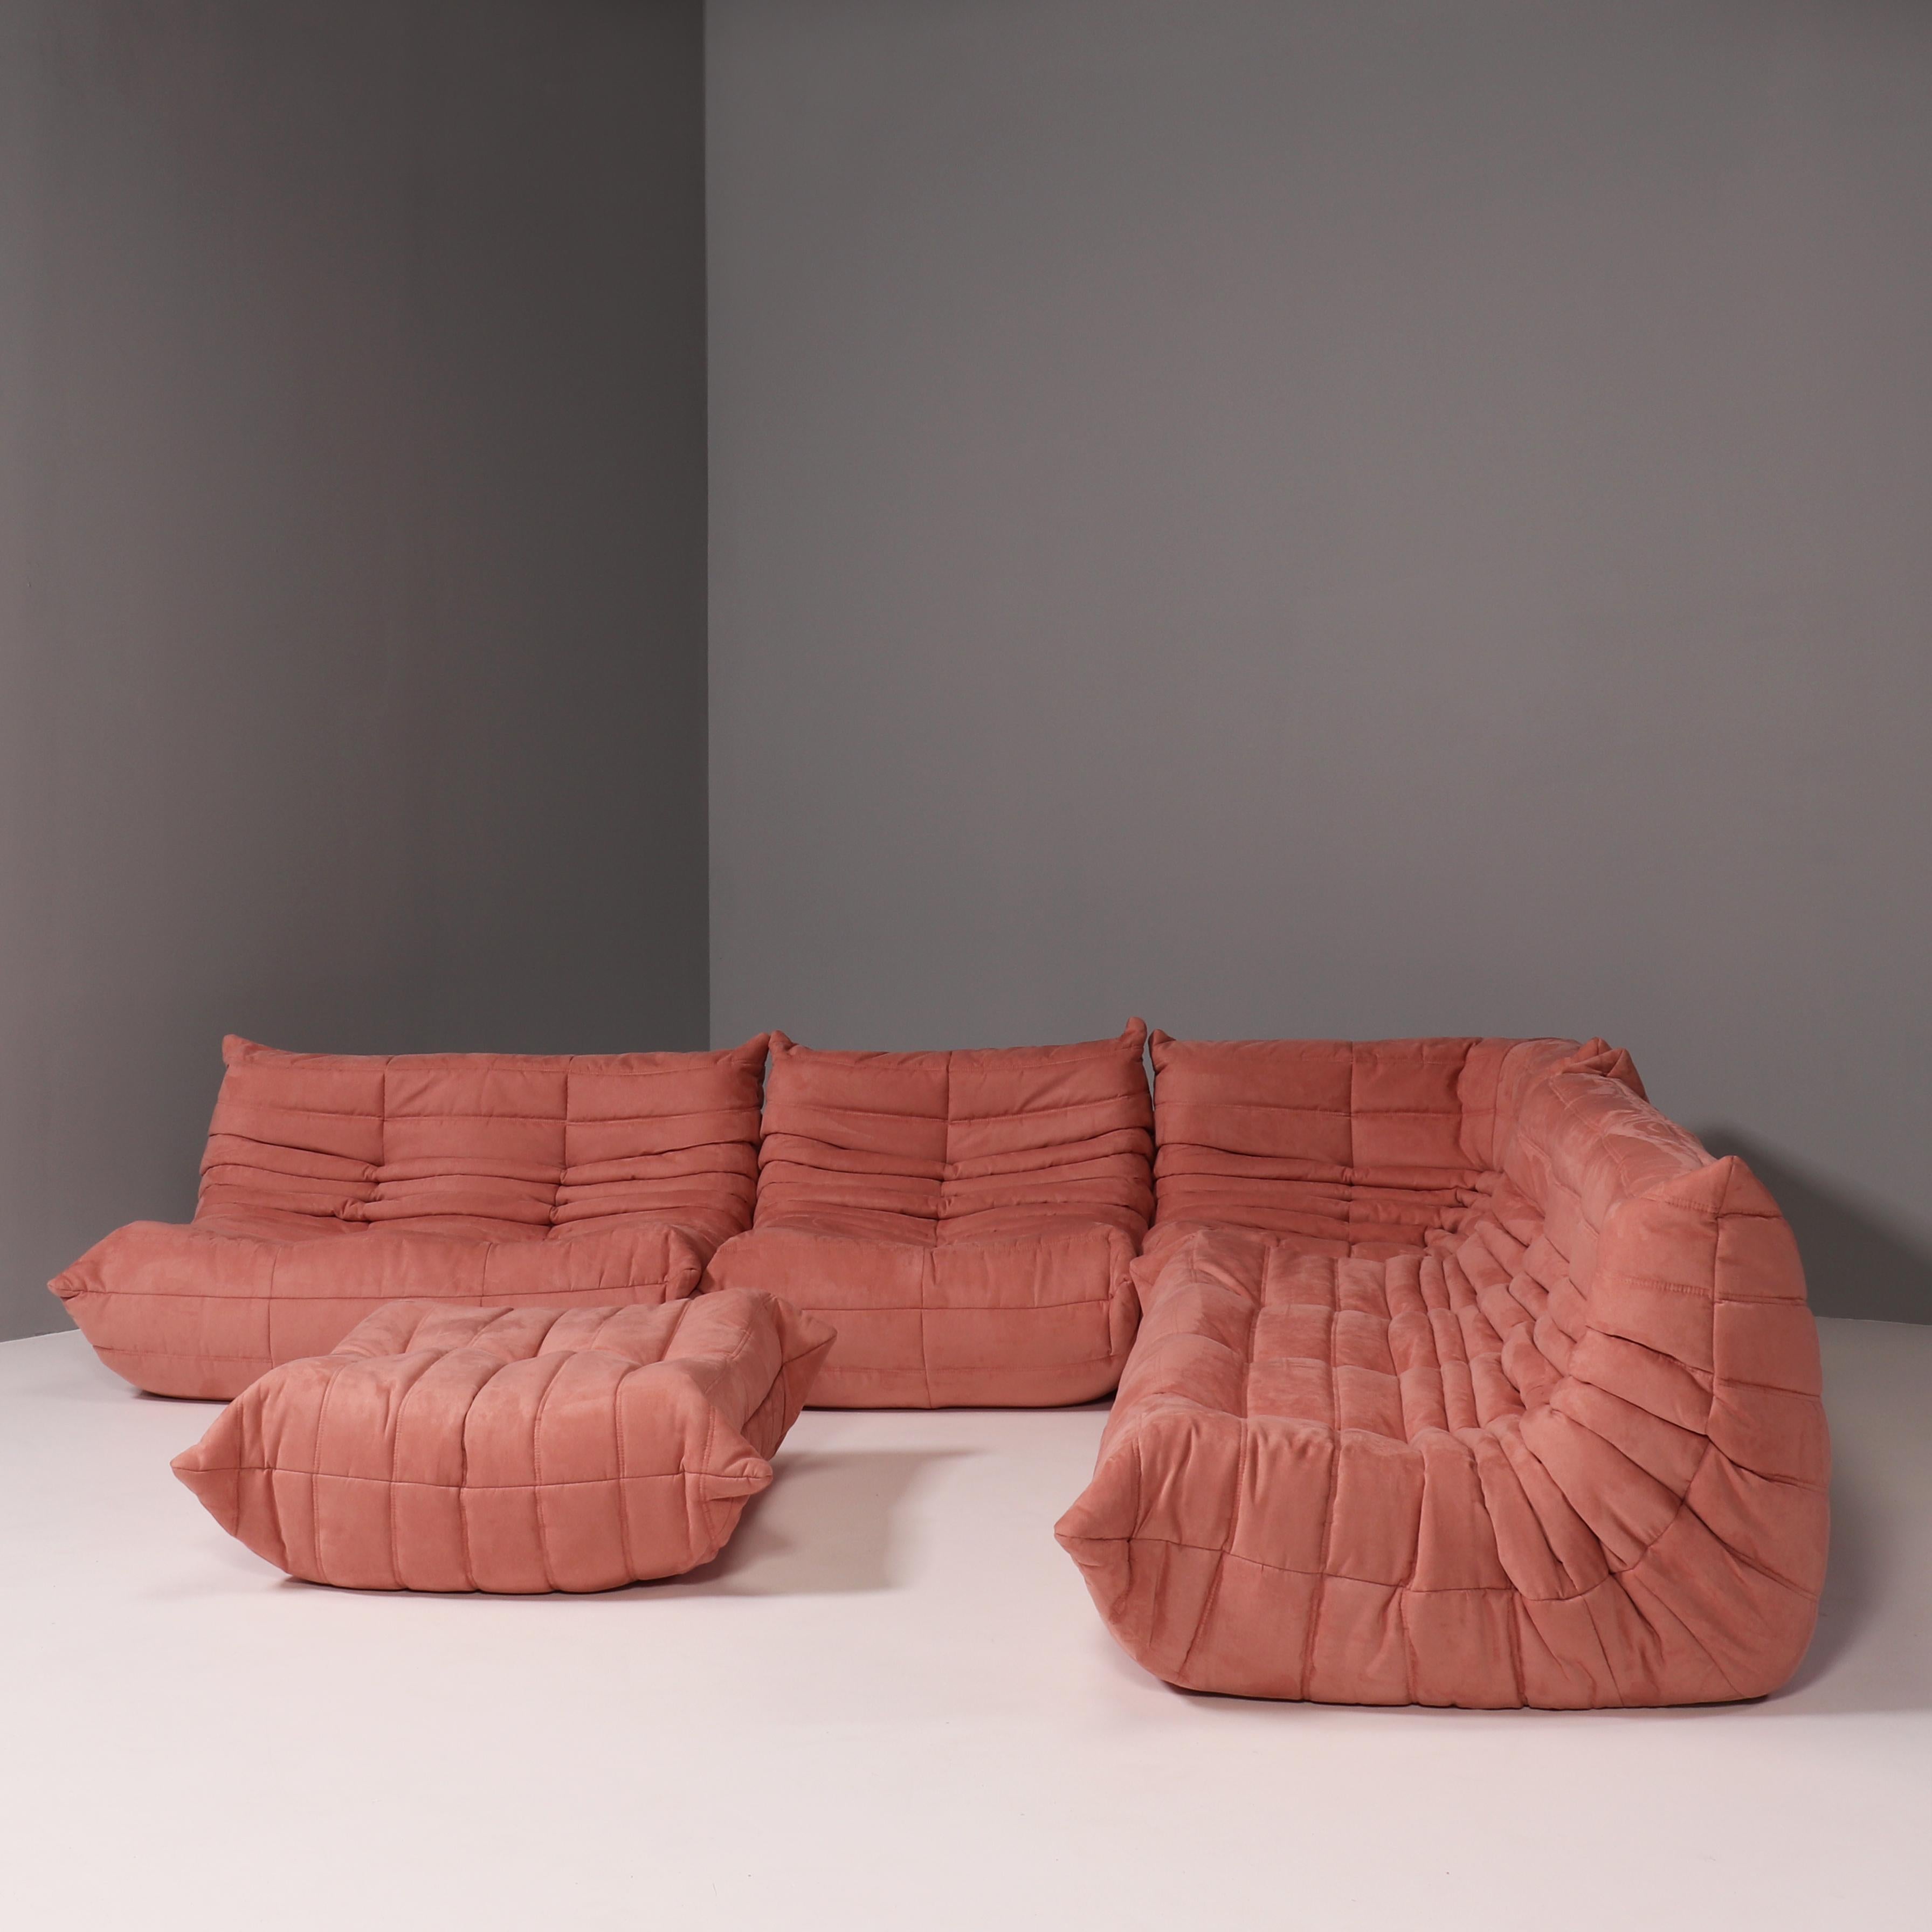 French Ligne Roset by Michel Ducaroy Pink Togo Modular Sofa and Footstool, Set of Five